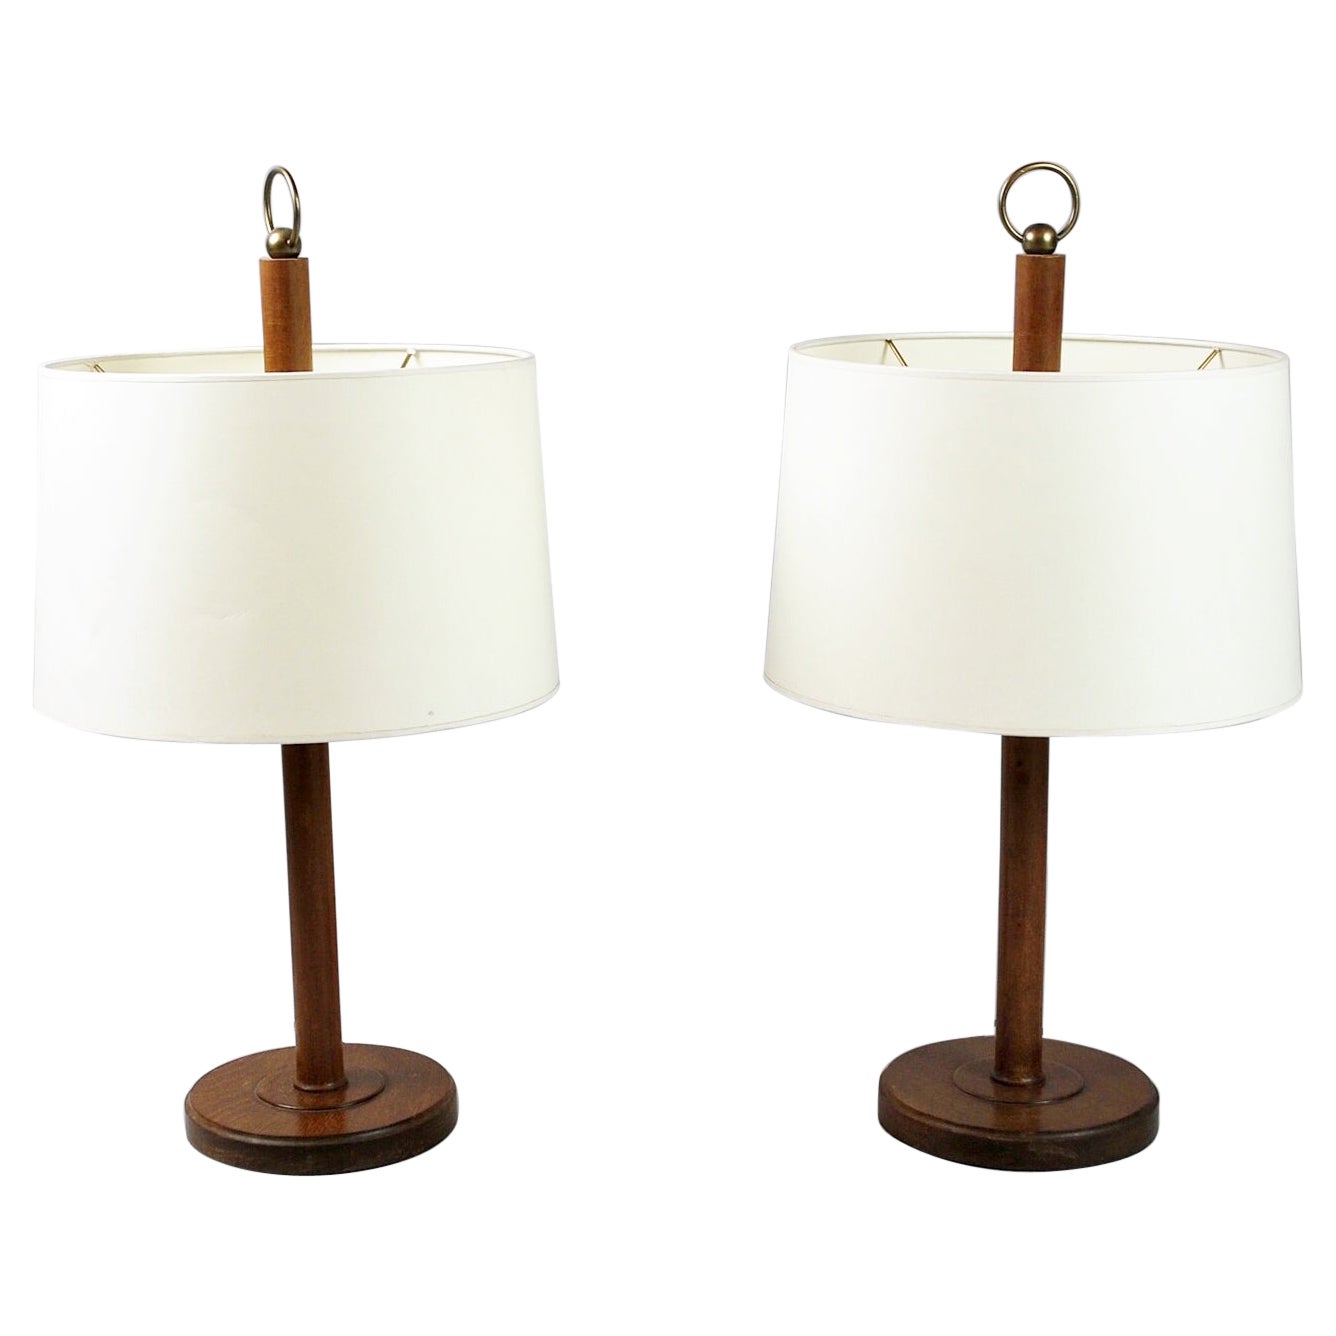 Pair of Art Deco Wooden Table Lamps, 1940s